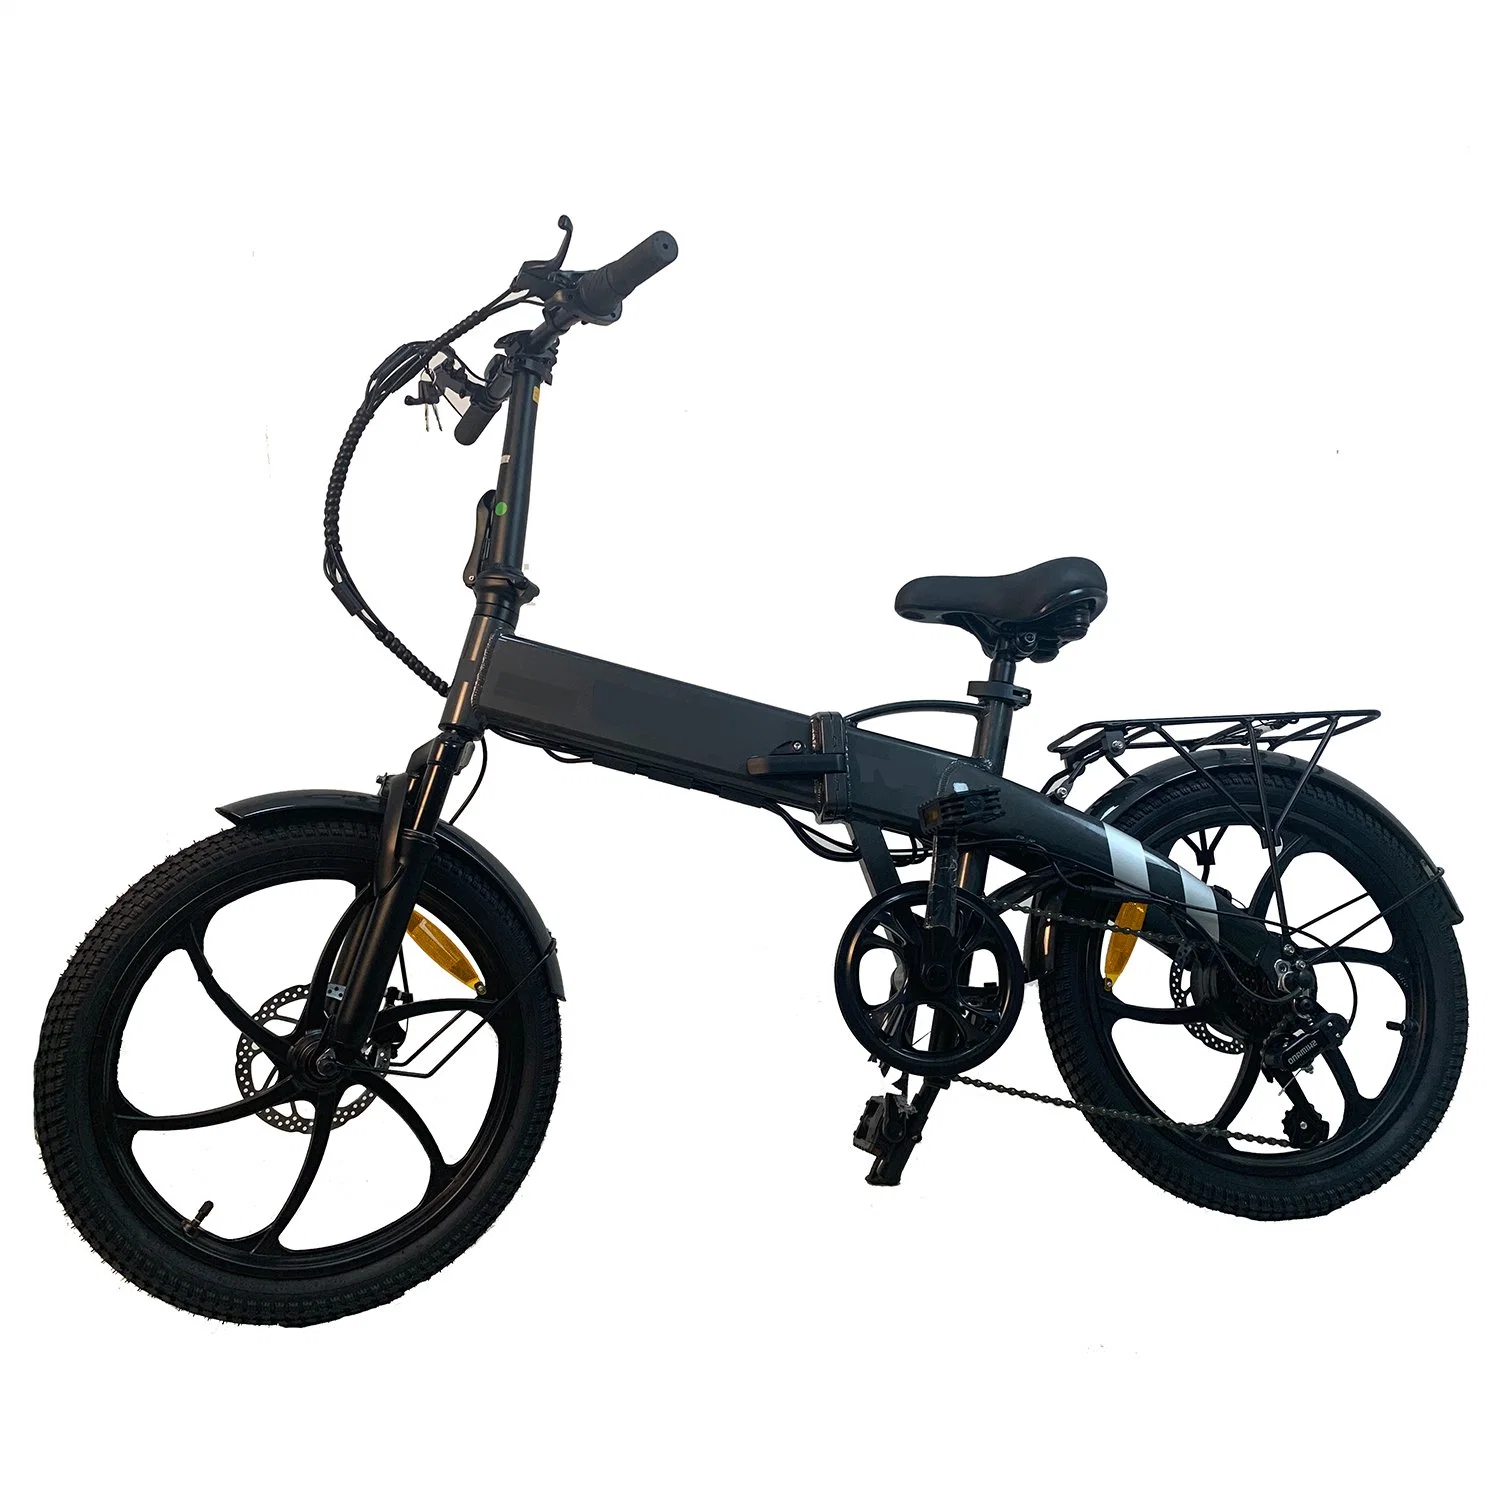 China Factory Electric Mountain Bicycle 1000W Rear Motor Dirt Bike Other City Ebike Lithium Battery 15ah MTB